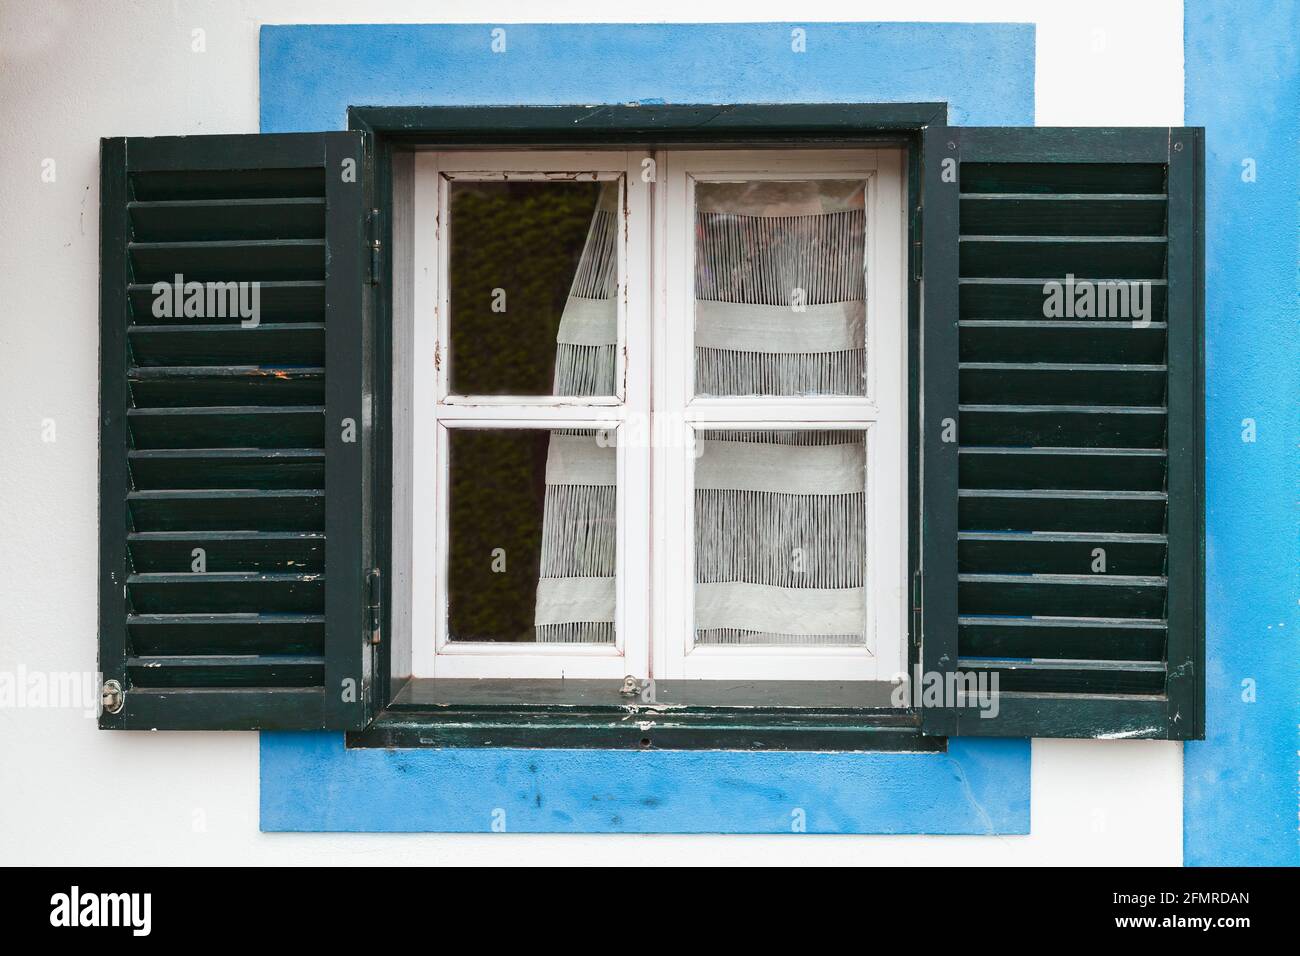 Window with open dark green shutters in blue frame. Rural architecture of Santana village, Madeira island, Portugal Stock Photo